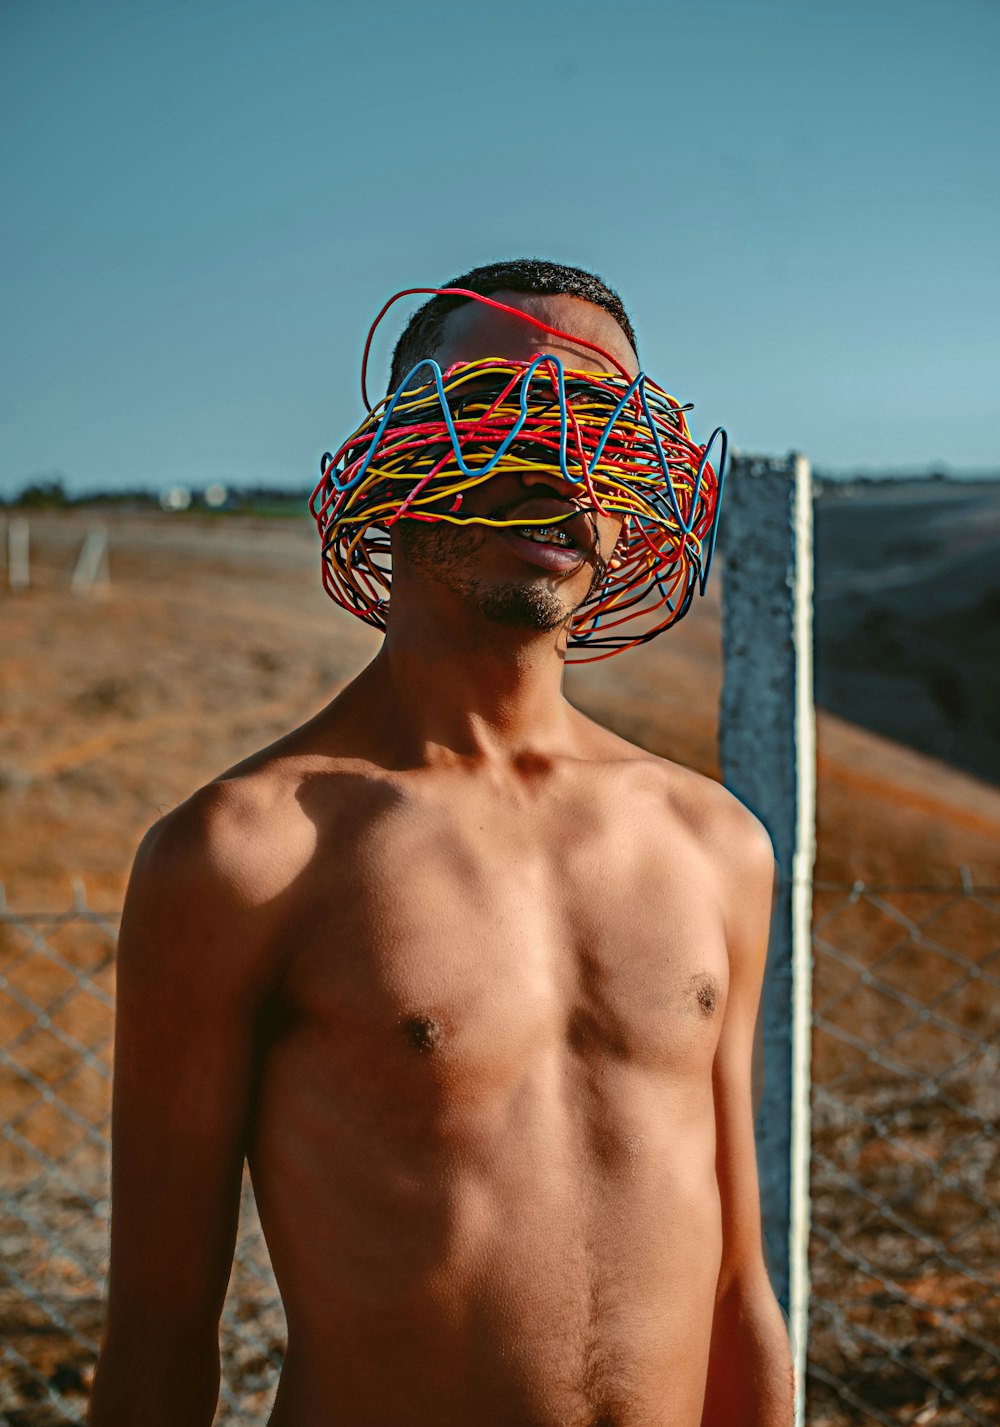 a shirtless man standing in front of a fence